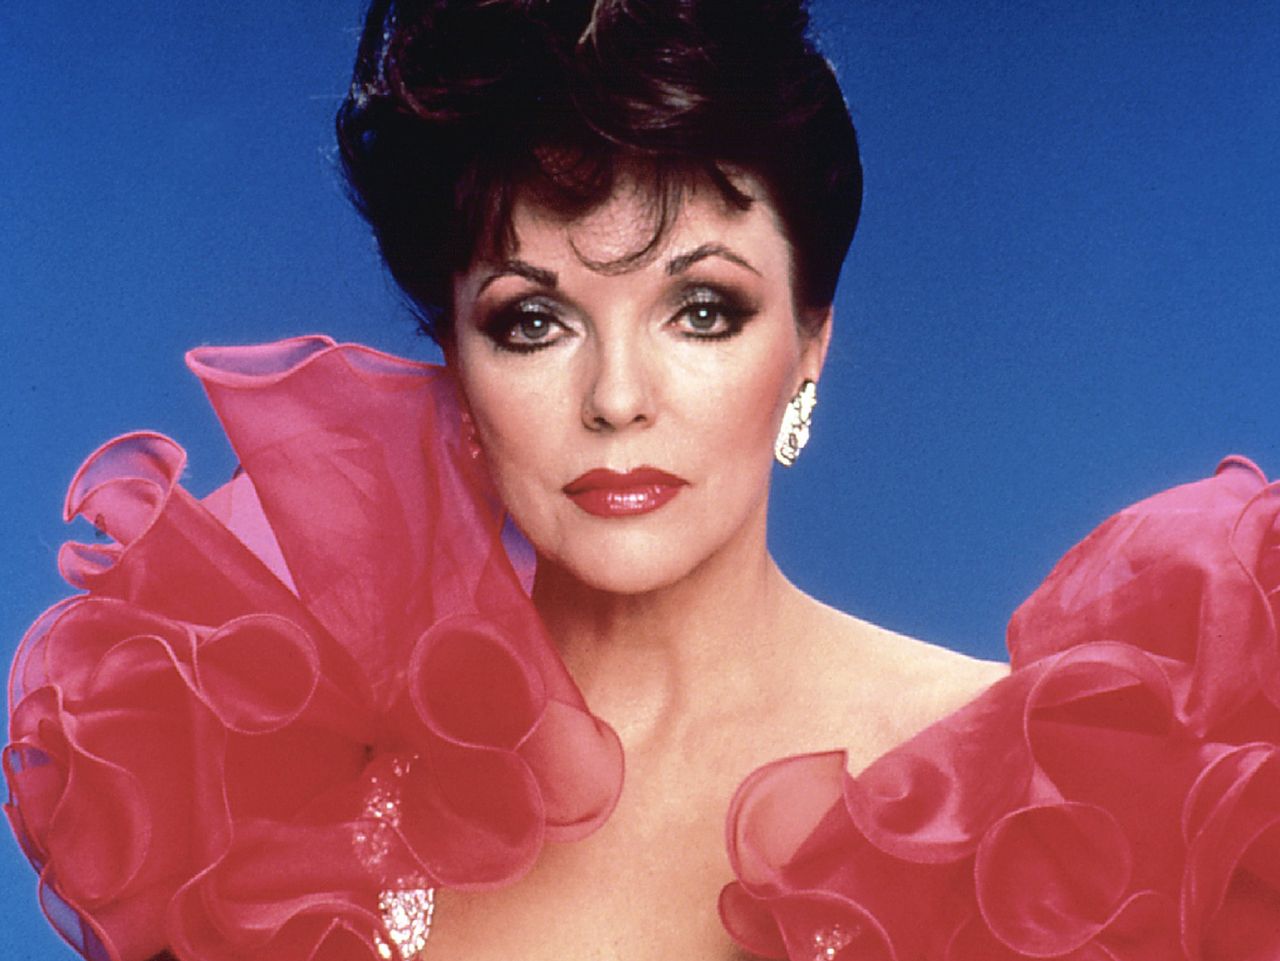 Joan Collins played the character Alexis in "Dynasty".